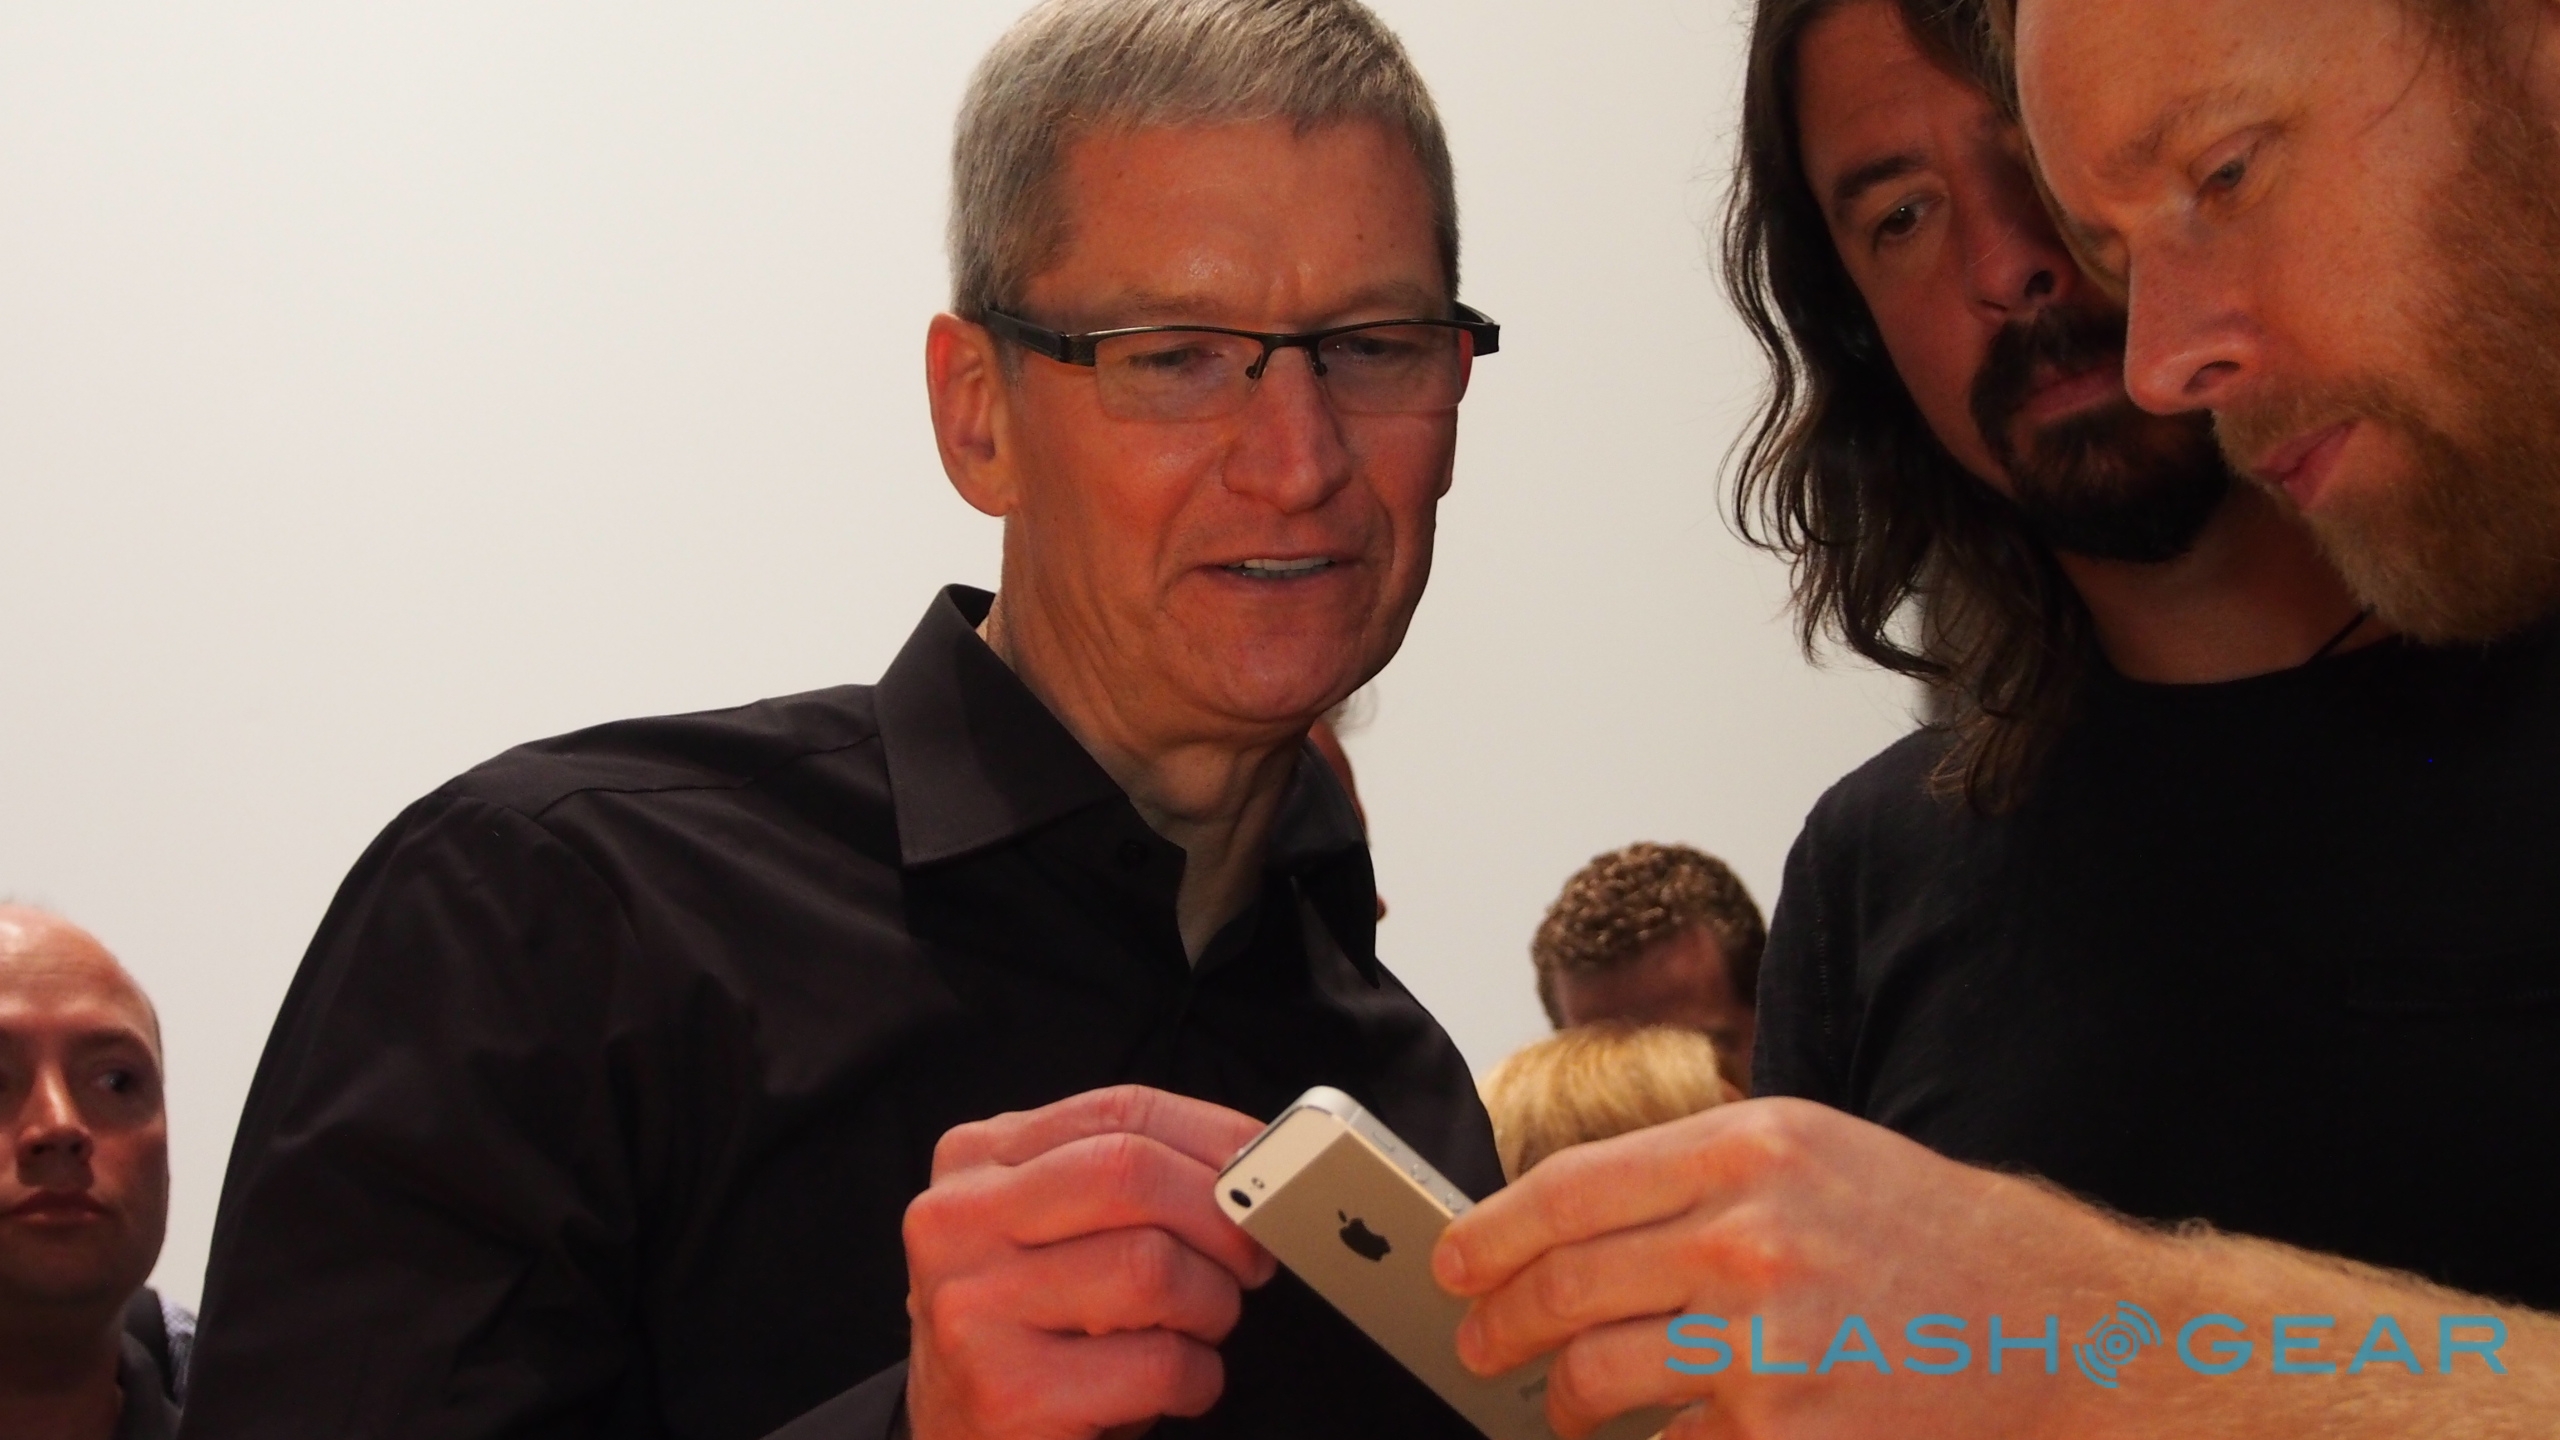 Tim Cook e Dave Grohl mexendo no iPhone 5